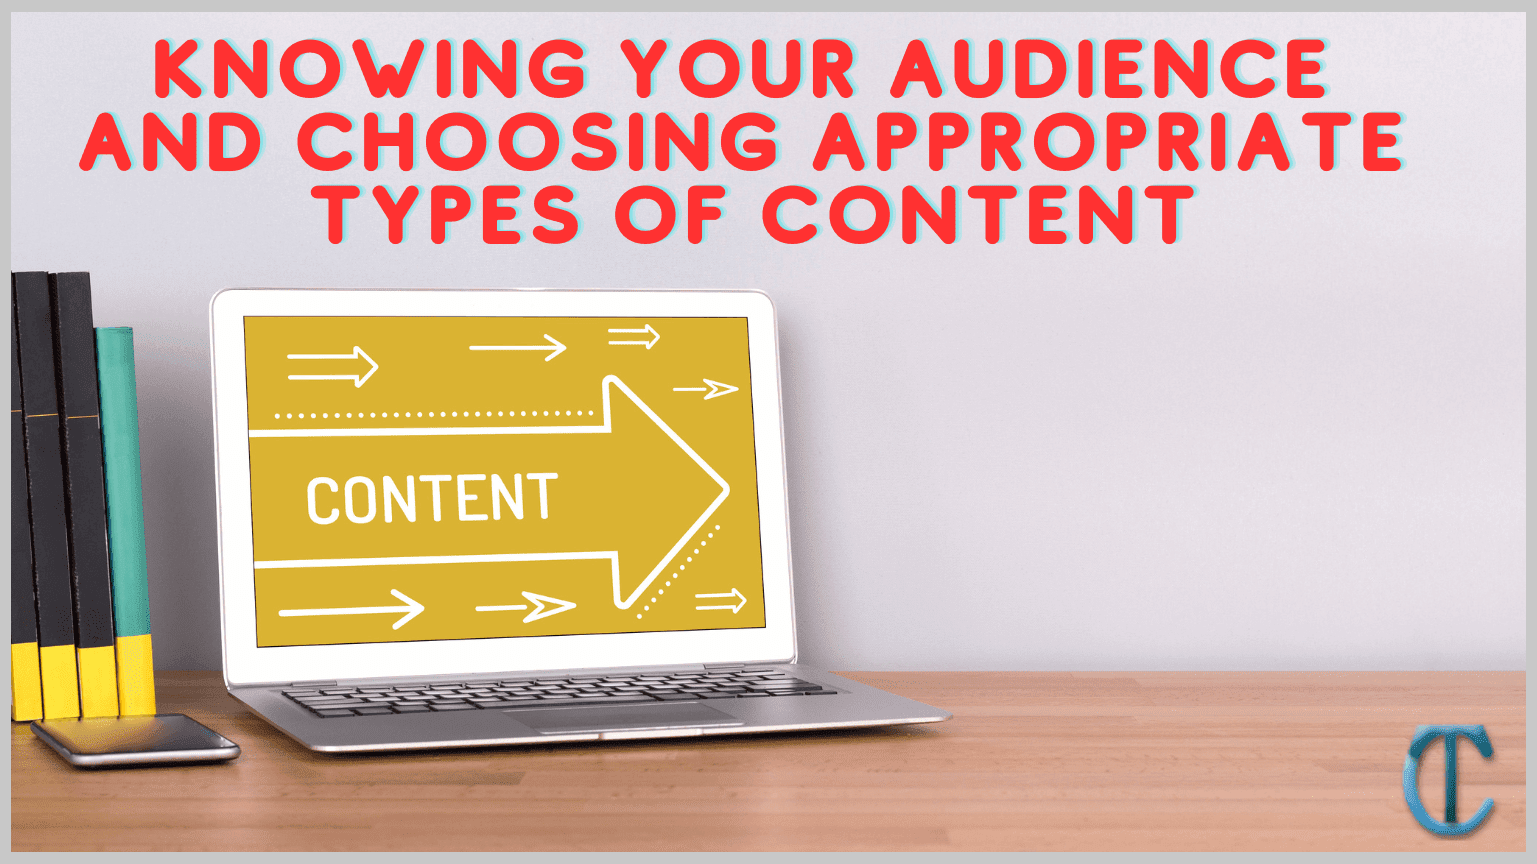 Knowing Your Audience and Choosing Appropriate Types of Content